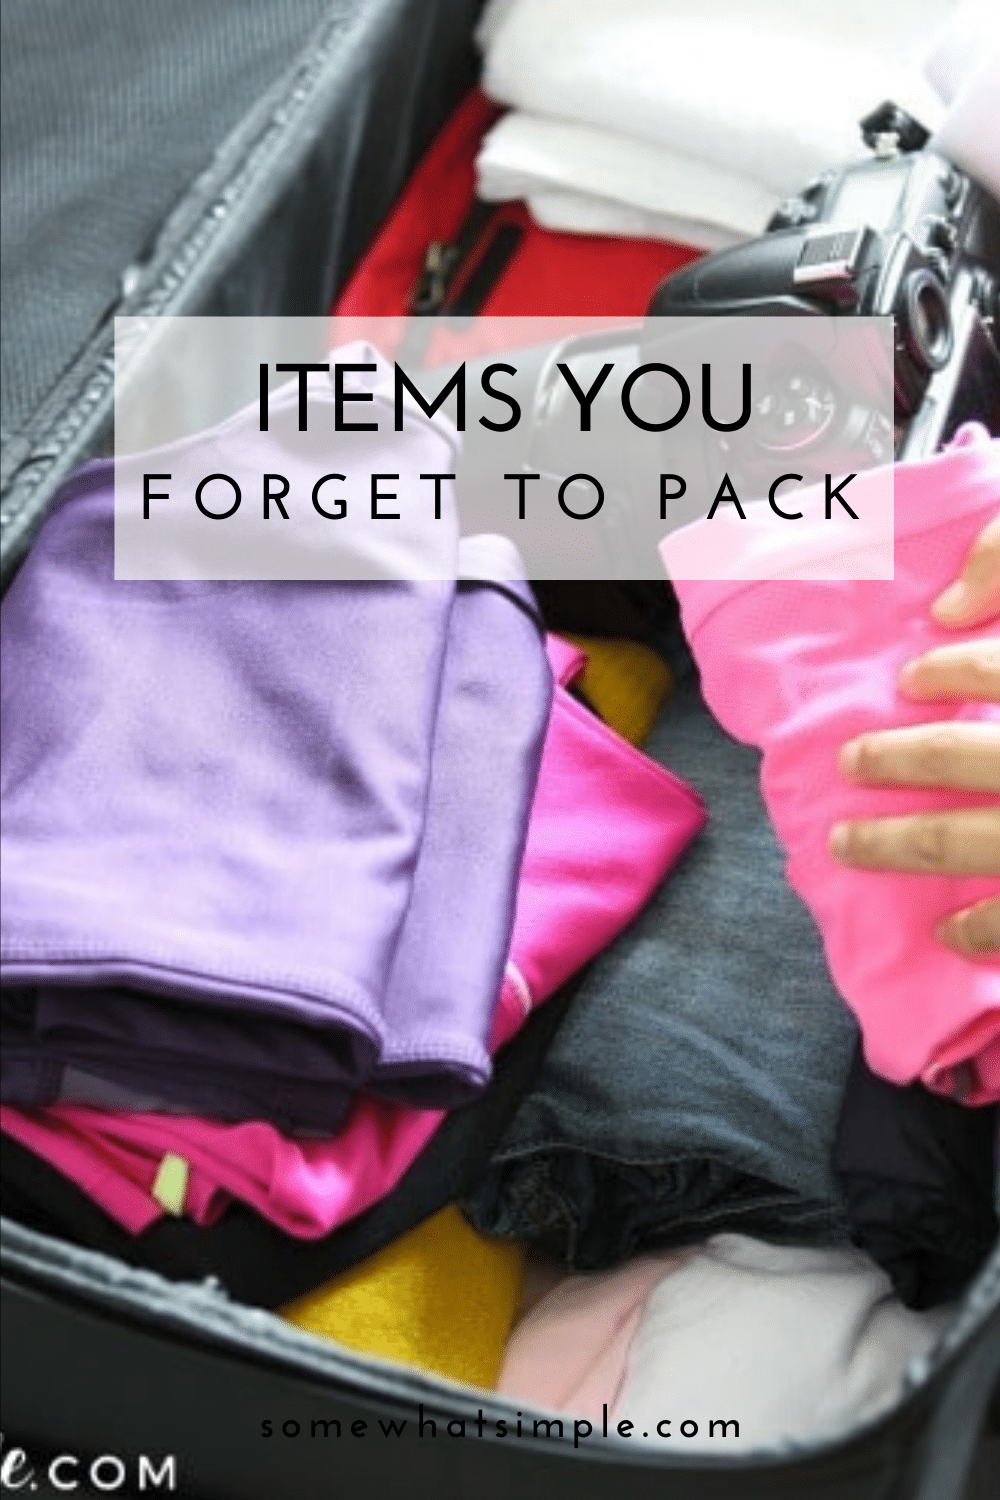 Don't you hat going on vacation only to realize you forgot something? With this list of ideas, you'll never have that problem again. From trash bags to duct tape, a power strip and more! Here is a list of things to pack in your suitcase that could save you some time and sanity on your next vacation! Now you can rest assured that you'll have everything you'll need for your next vacation. via @somewhatsimple